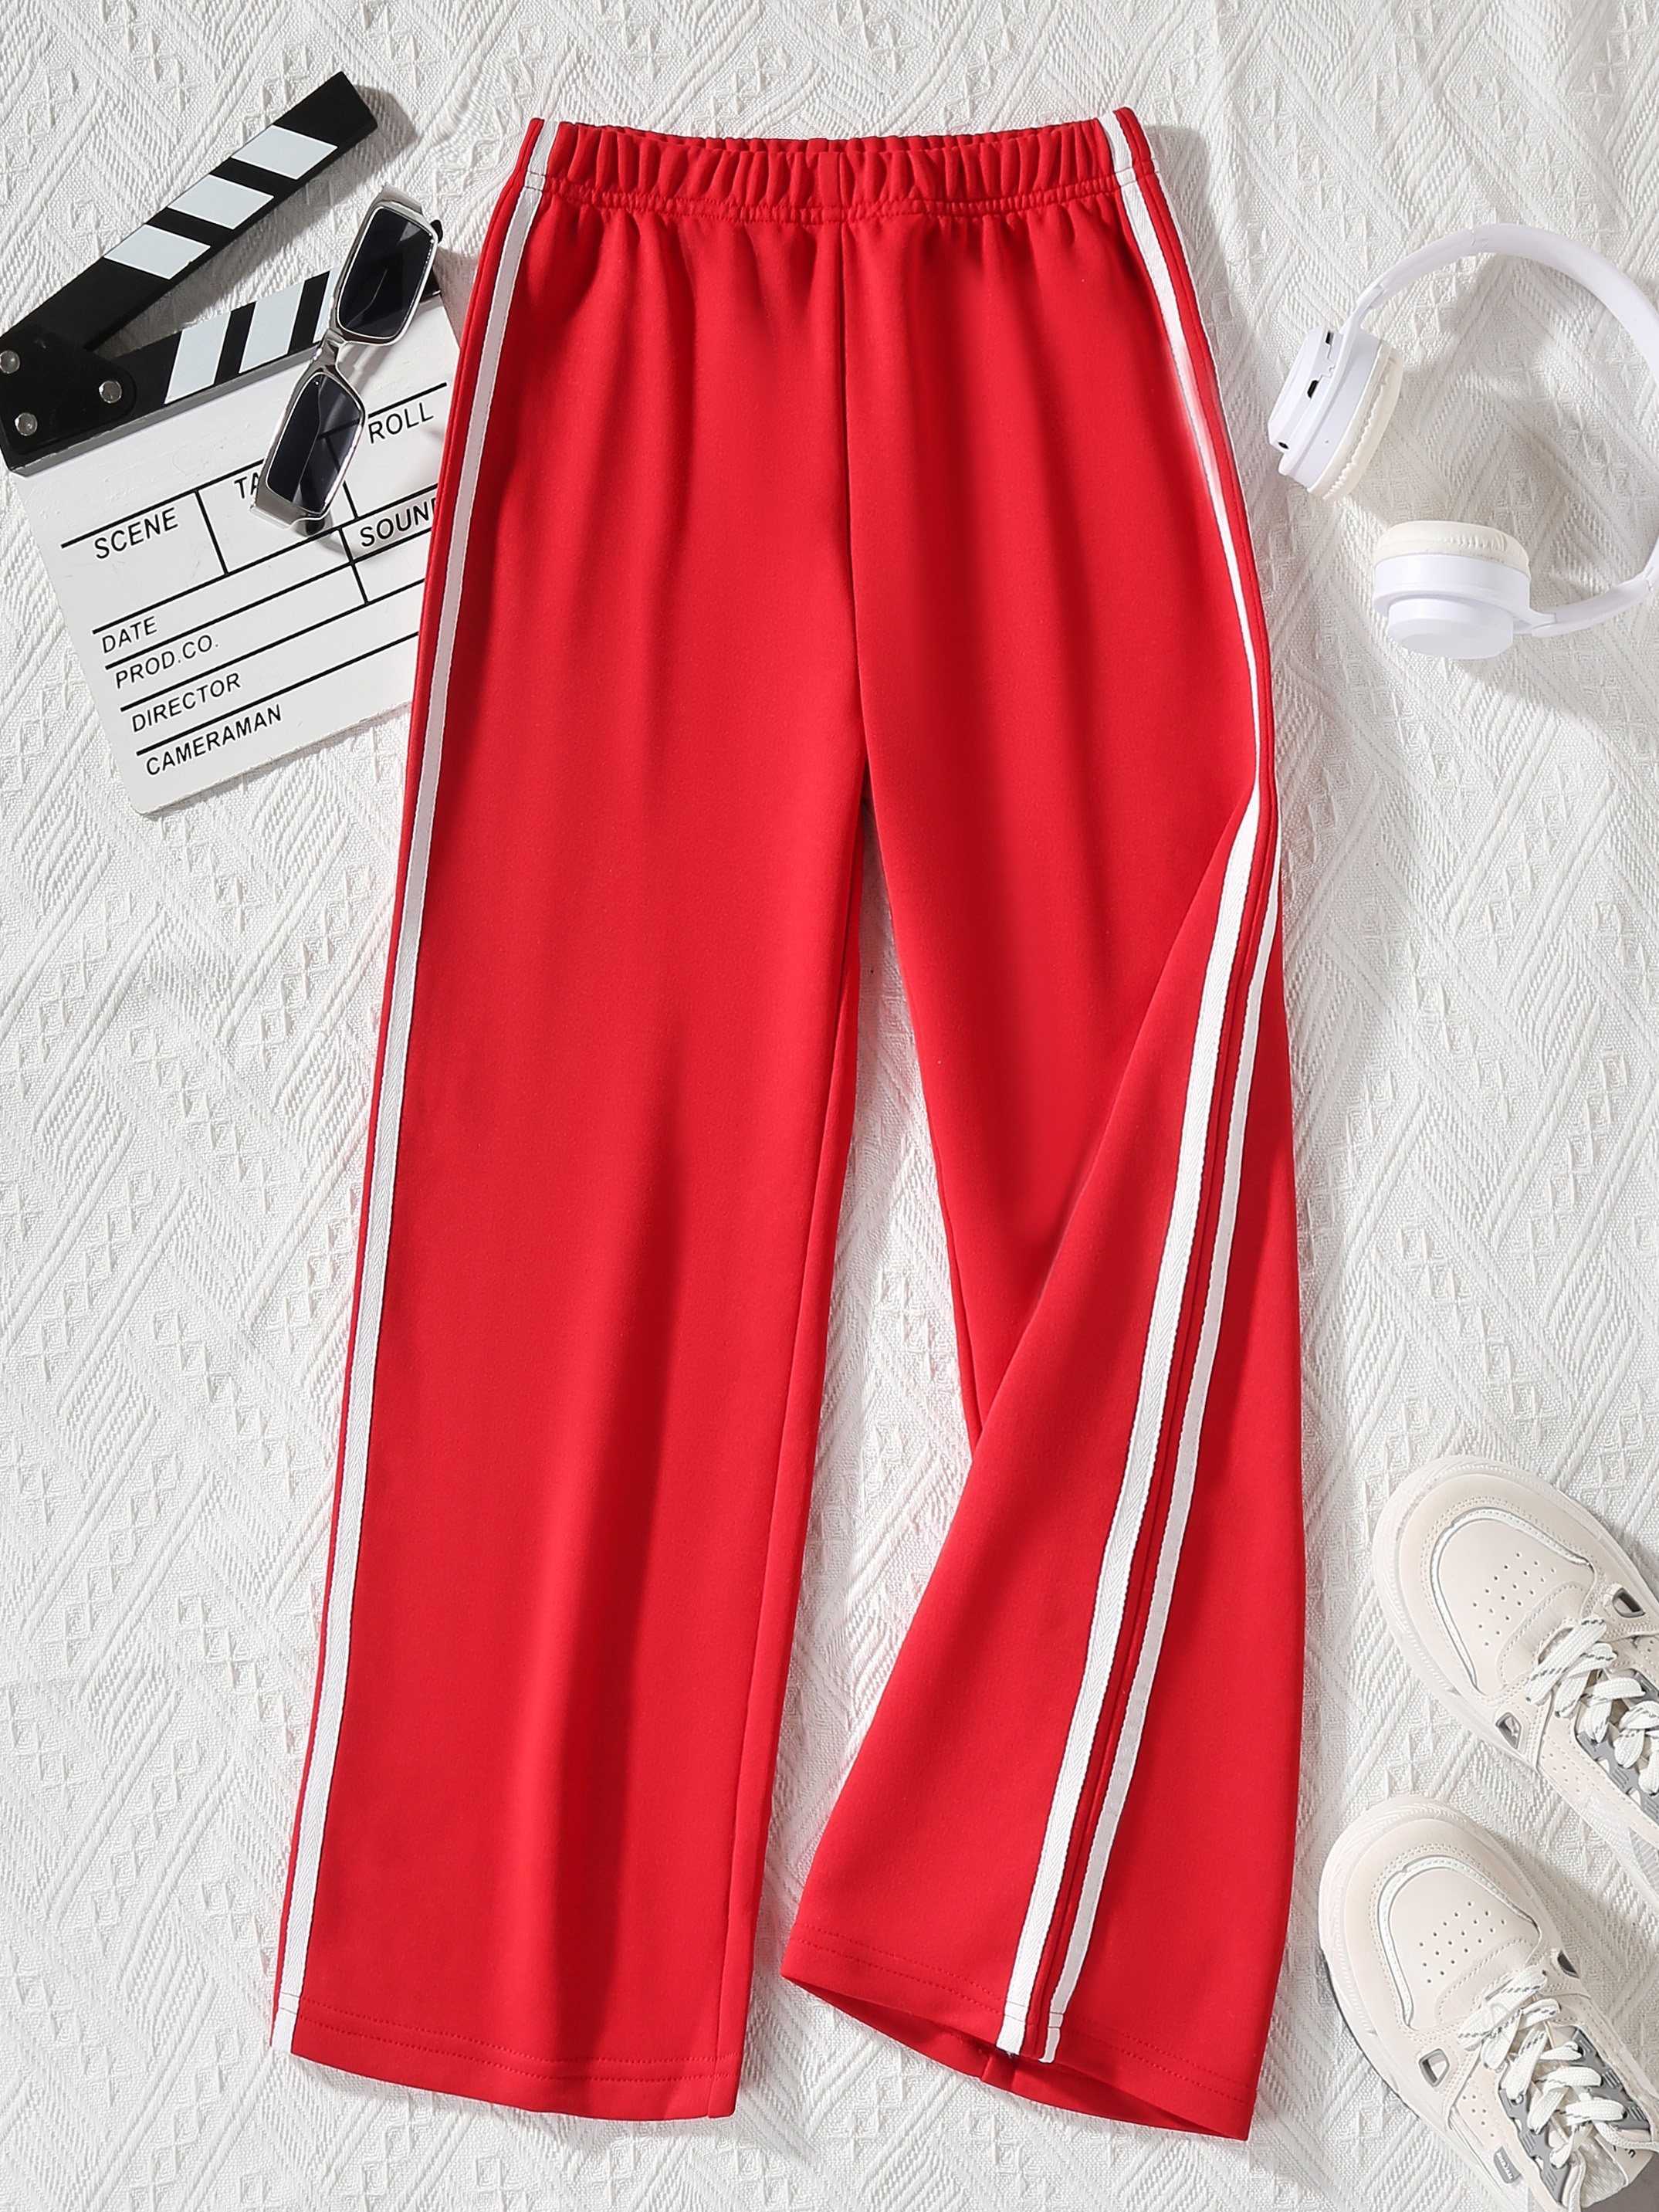 Women's Fashion High Waist Solid Color Sports Pants Skinny